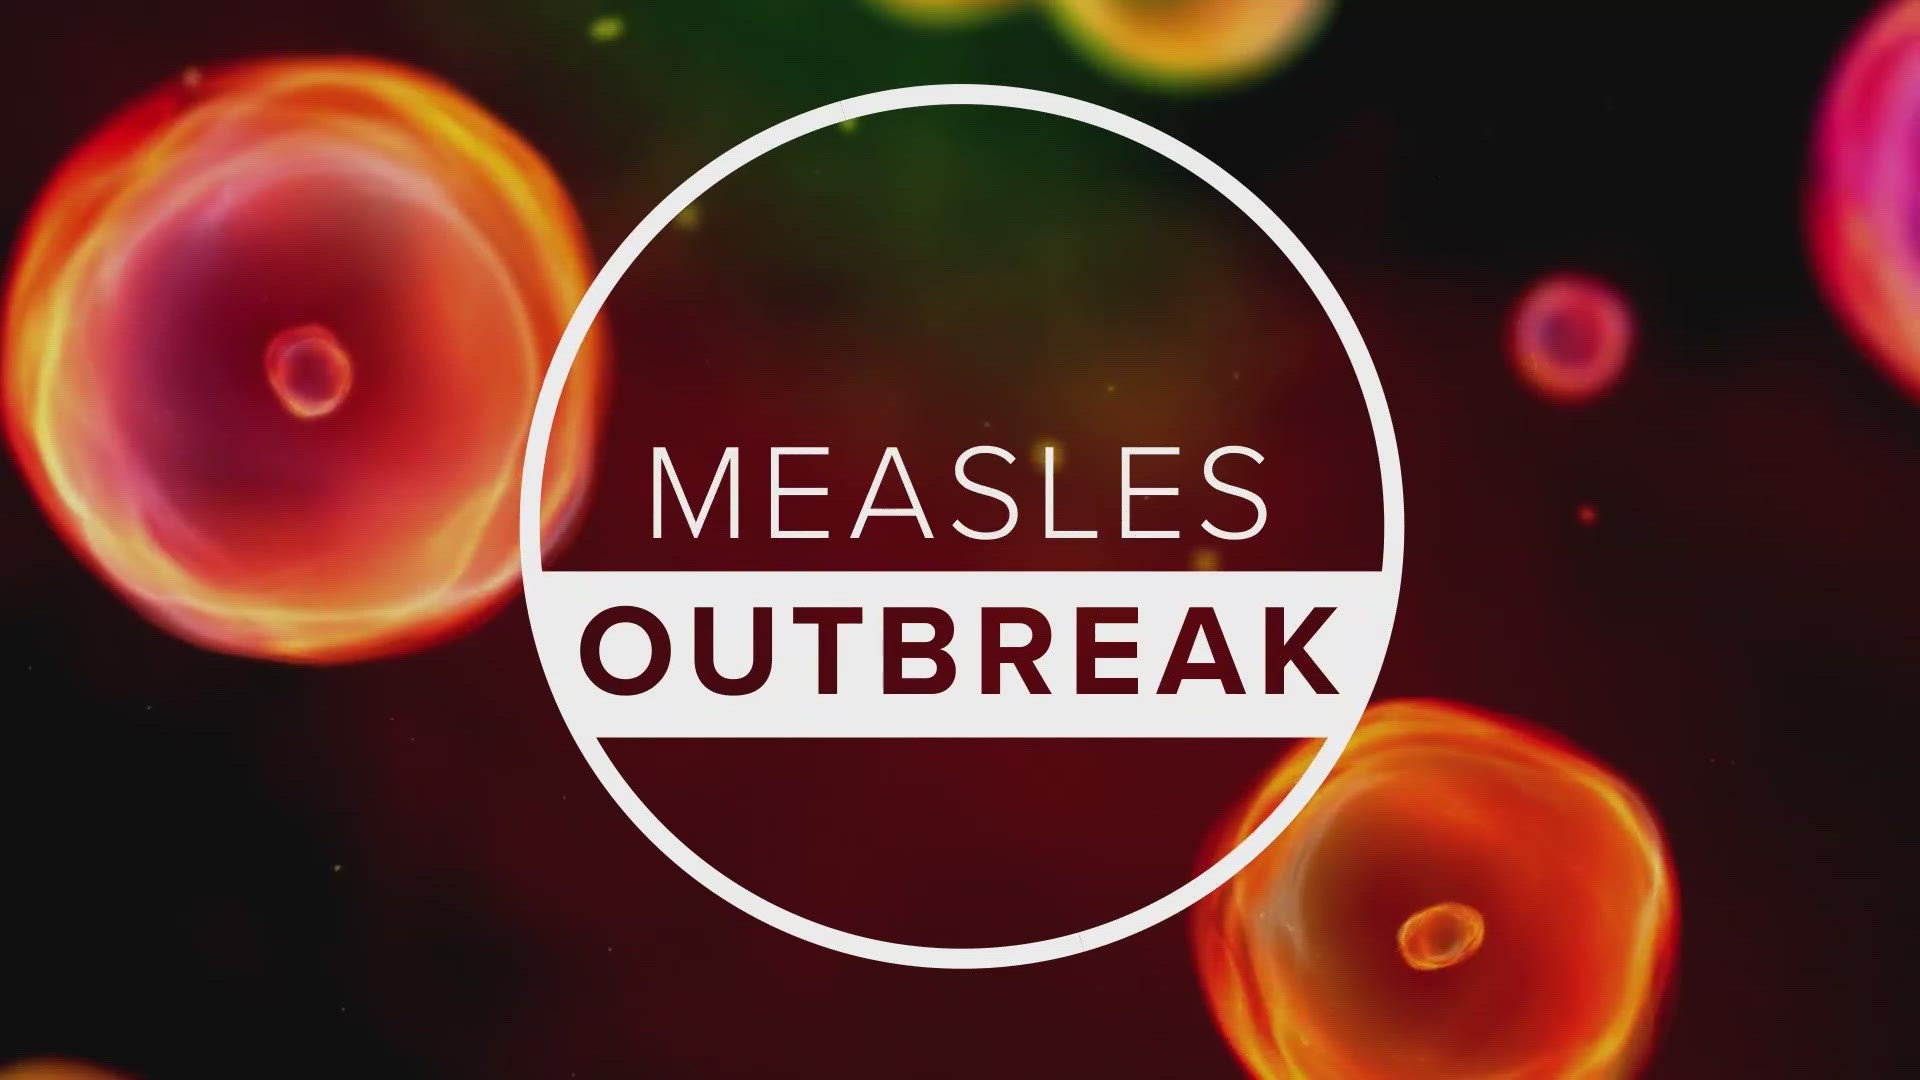 The City of Jacksonville said in a statement that measles cases could pop up in Northeast Florida due to Spring Break.